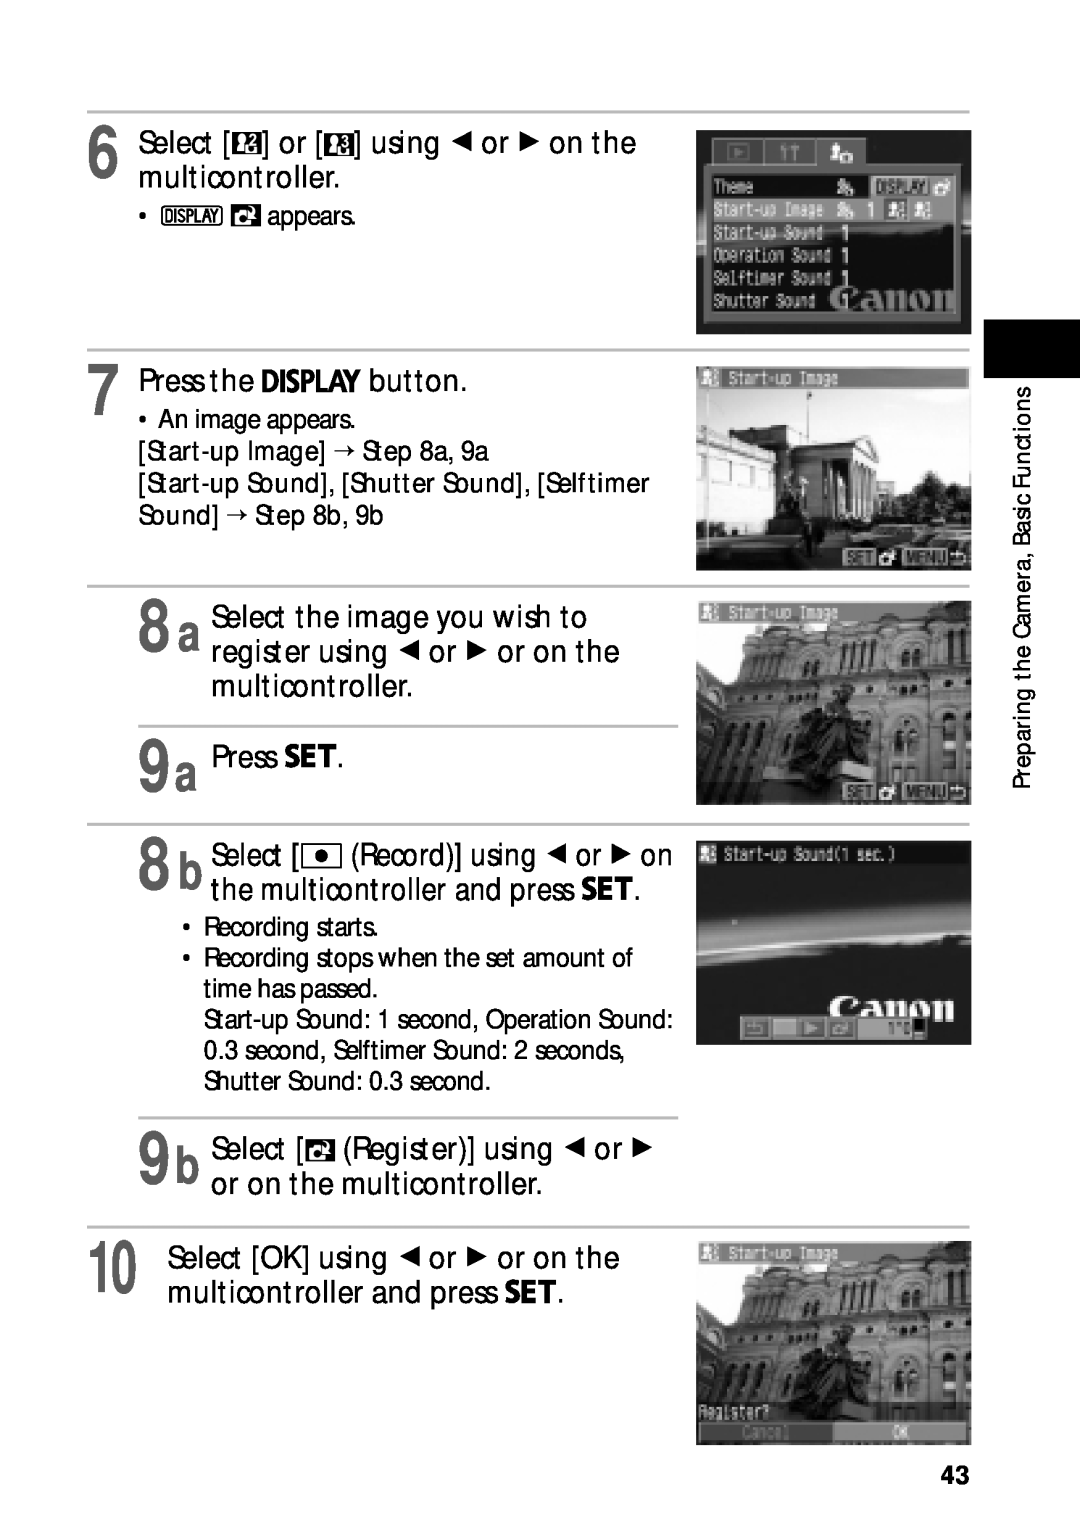 Canon PowerShot S45 manual appears 